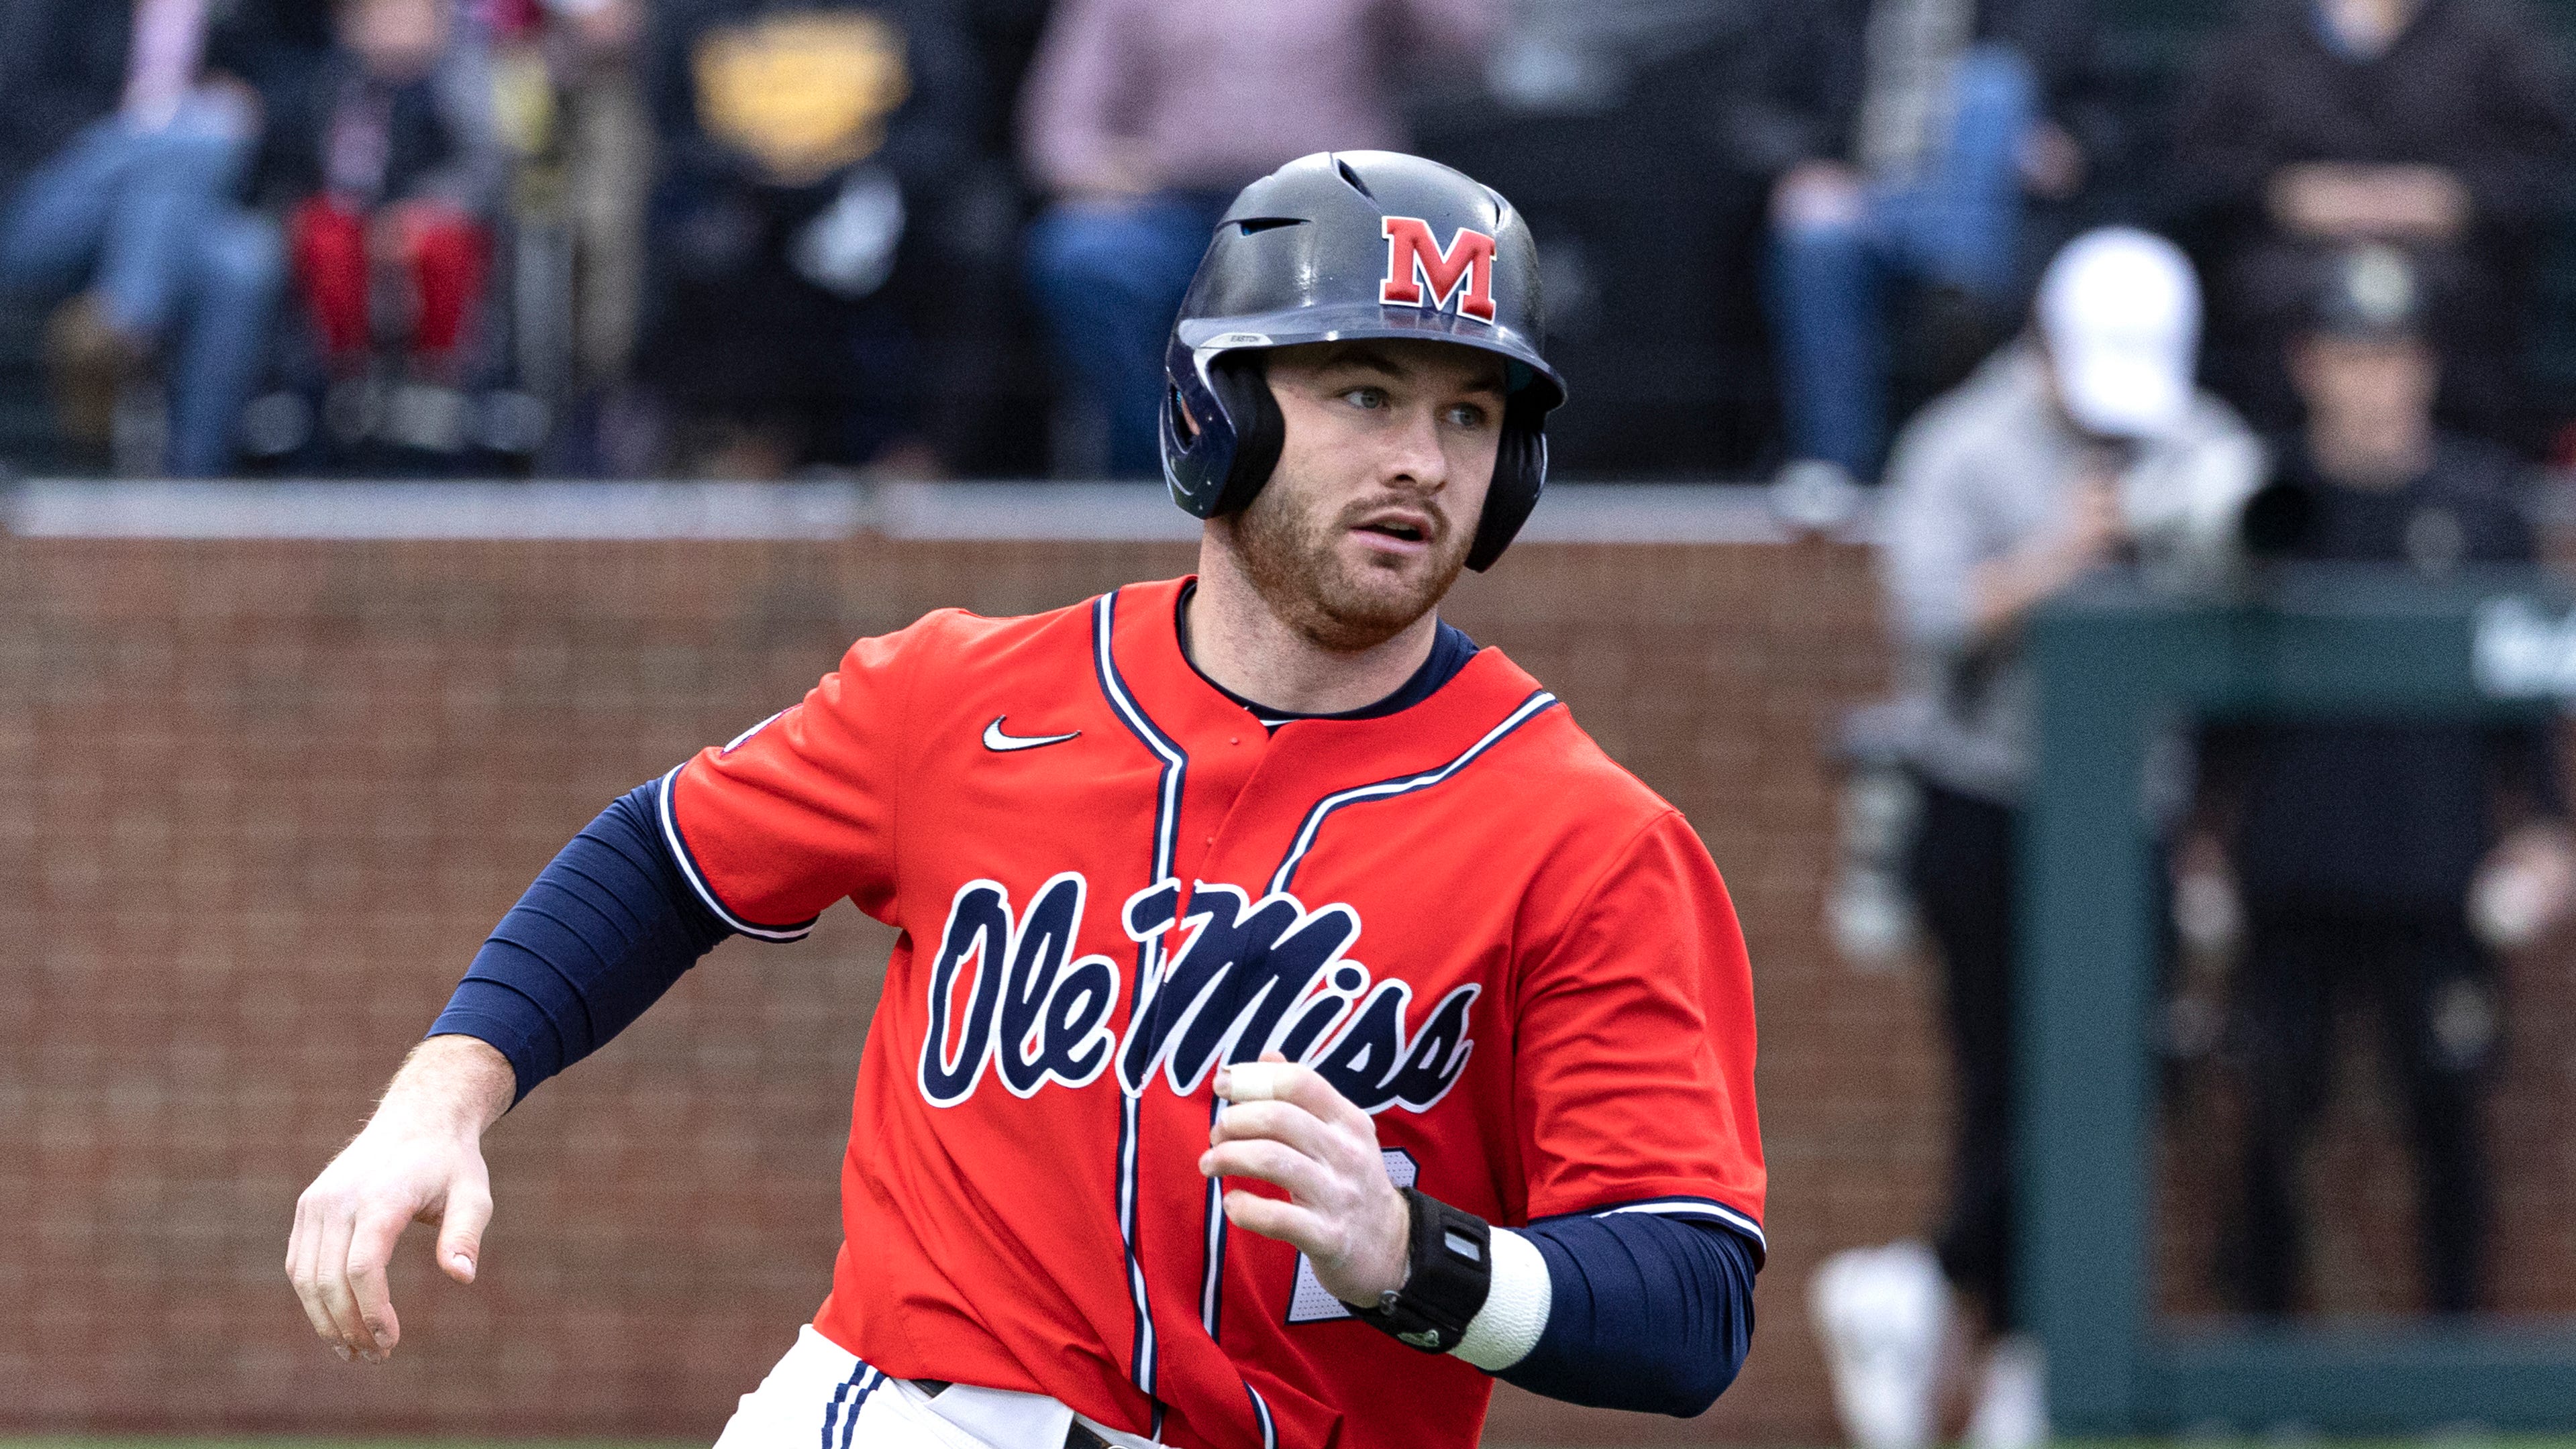 Ole Miss baseball signee Cooper Pratt selected by Milwaukee Brewers in